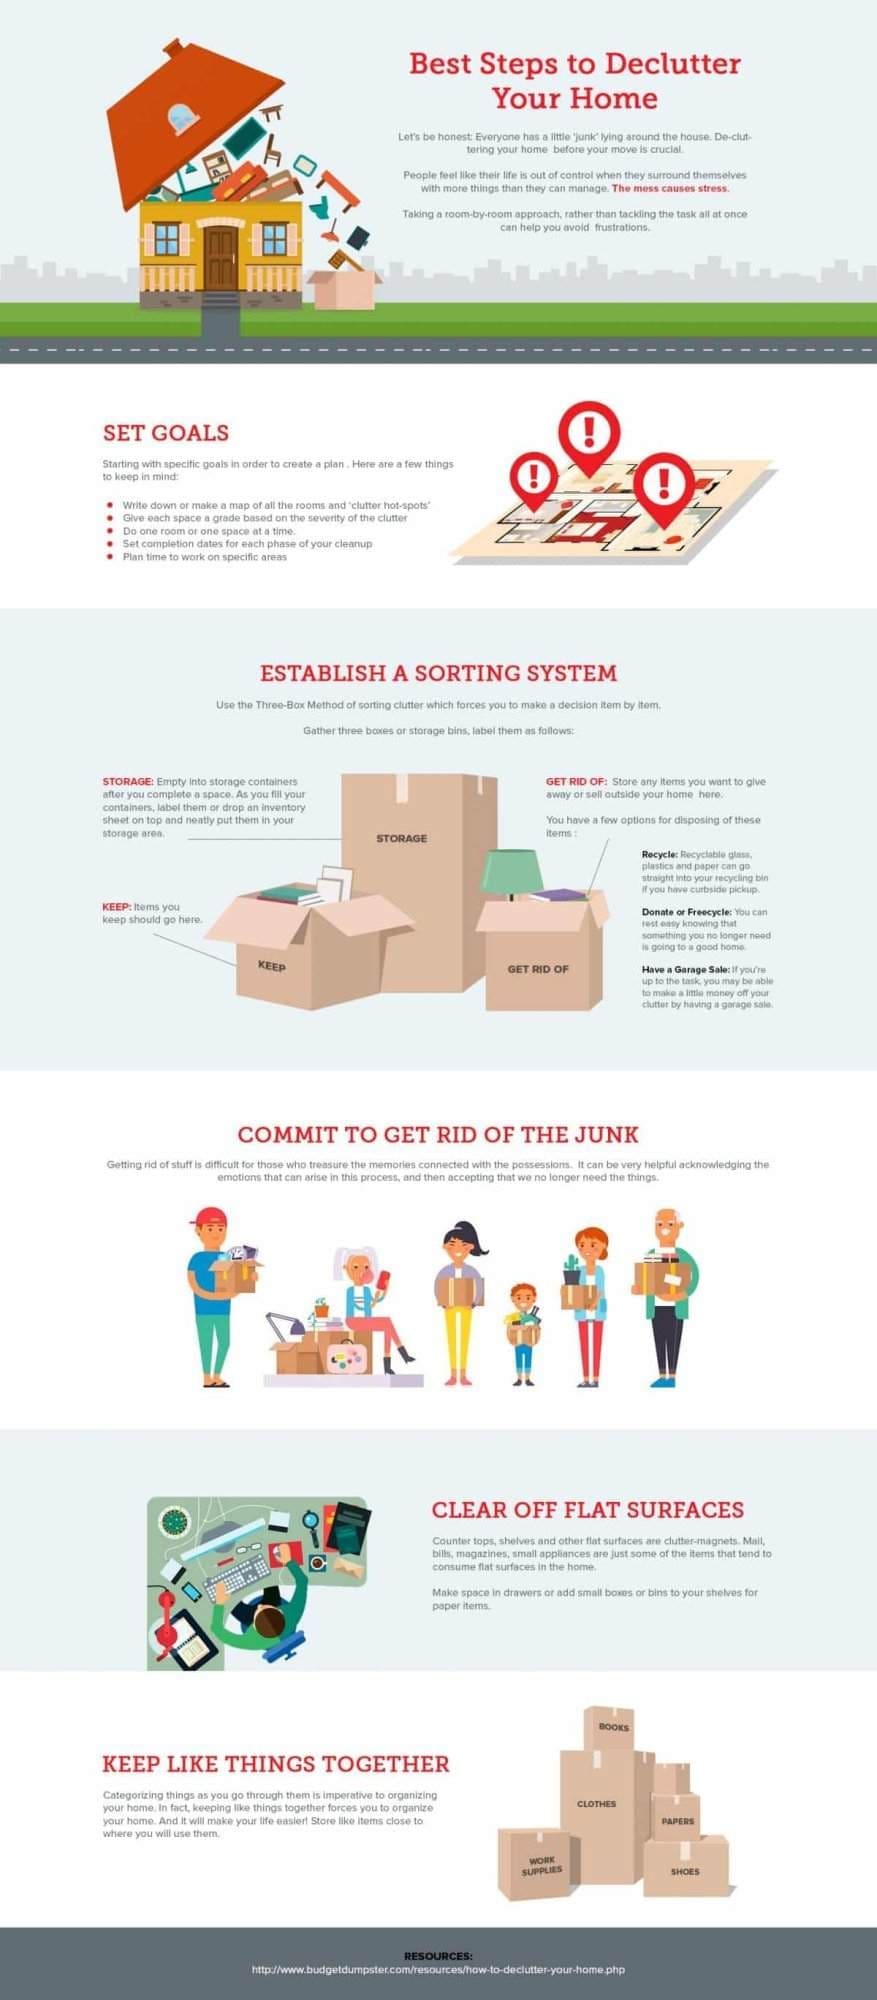 Infographic showing the 5 main steps to help us declutter our house or condo